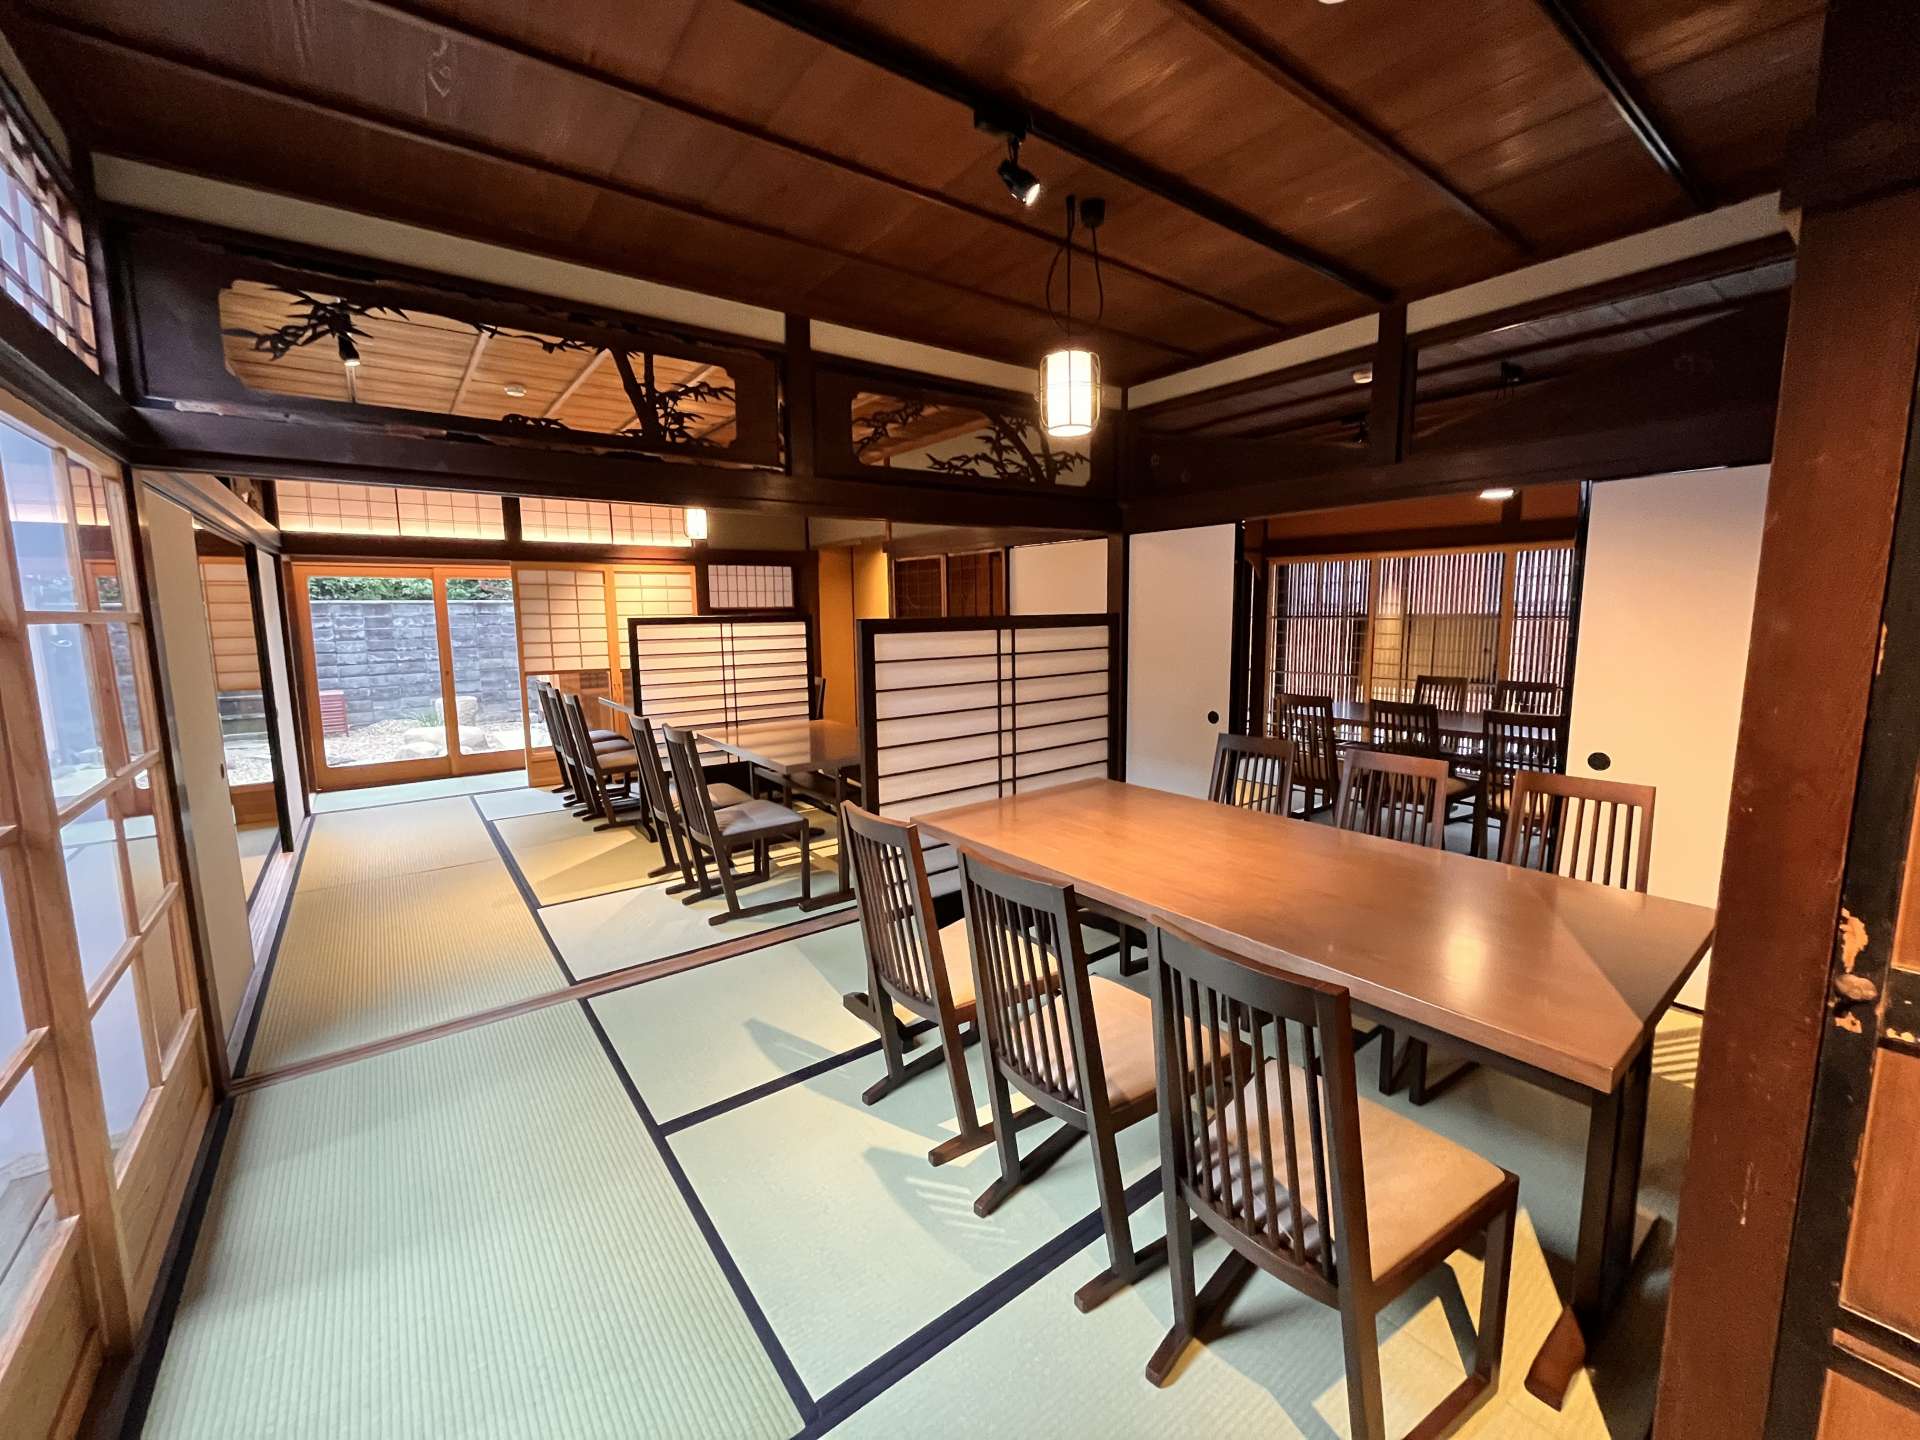 A lively counter awaits inside alongside tatami rooms overlooking the central courtyard.